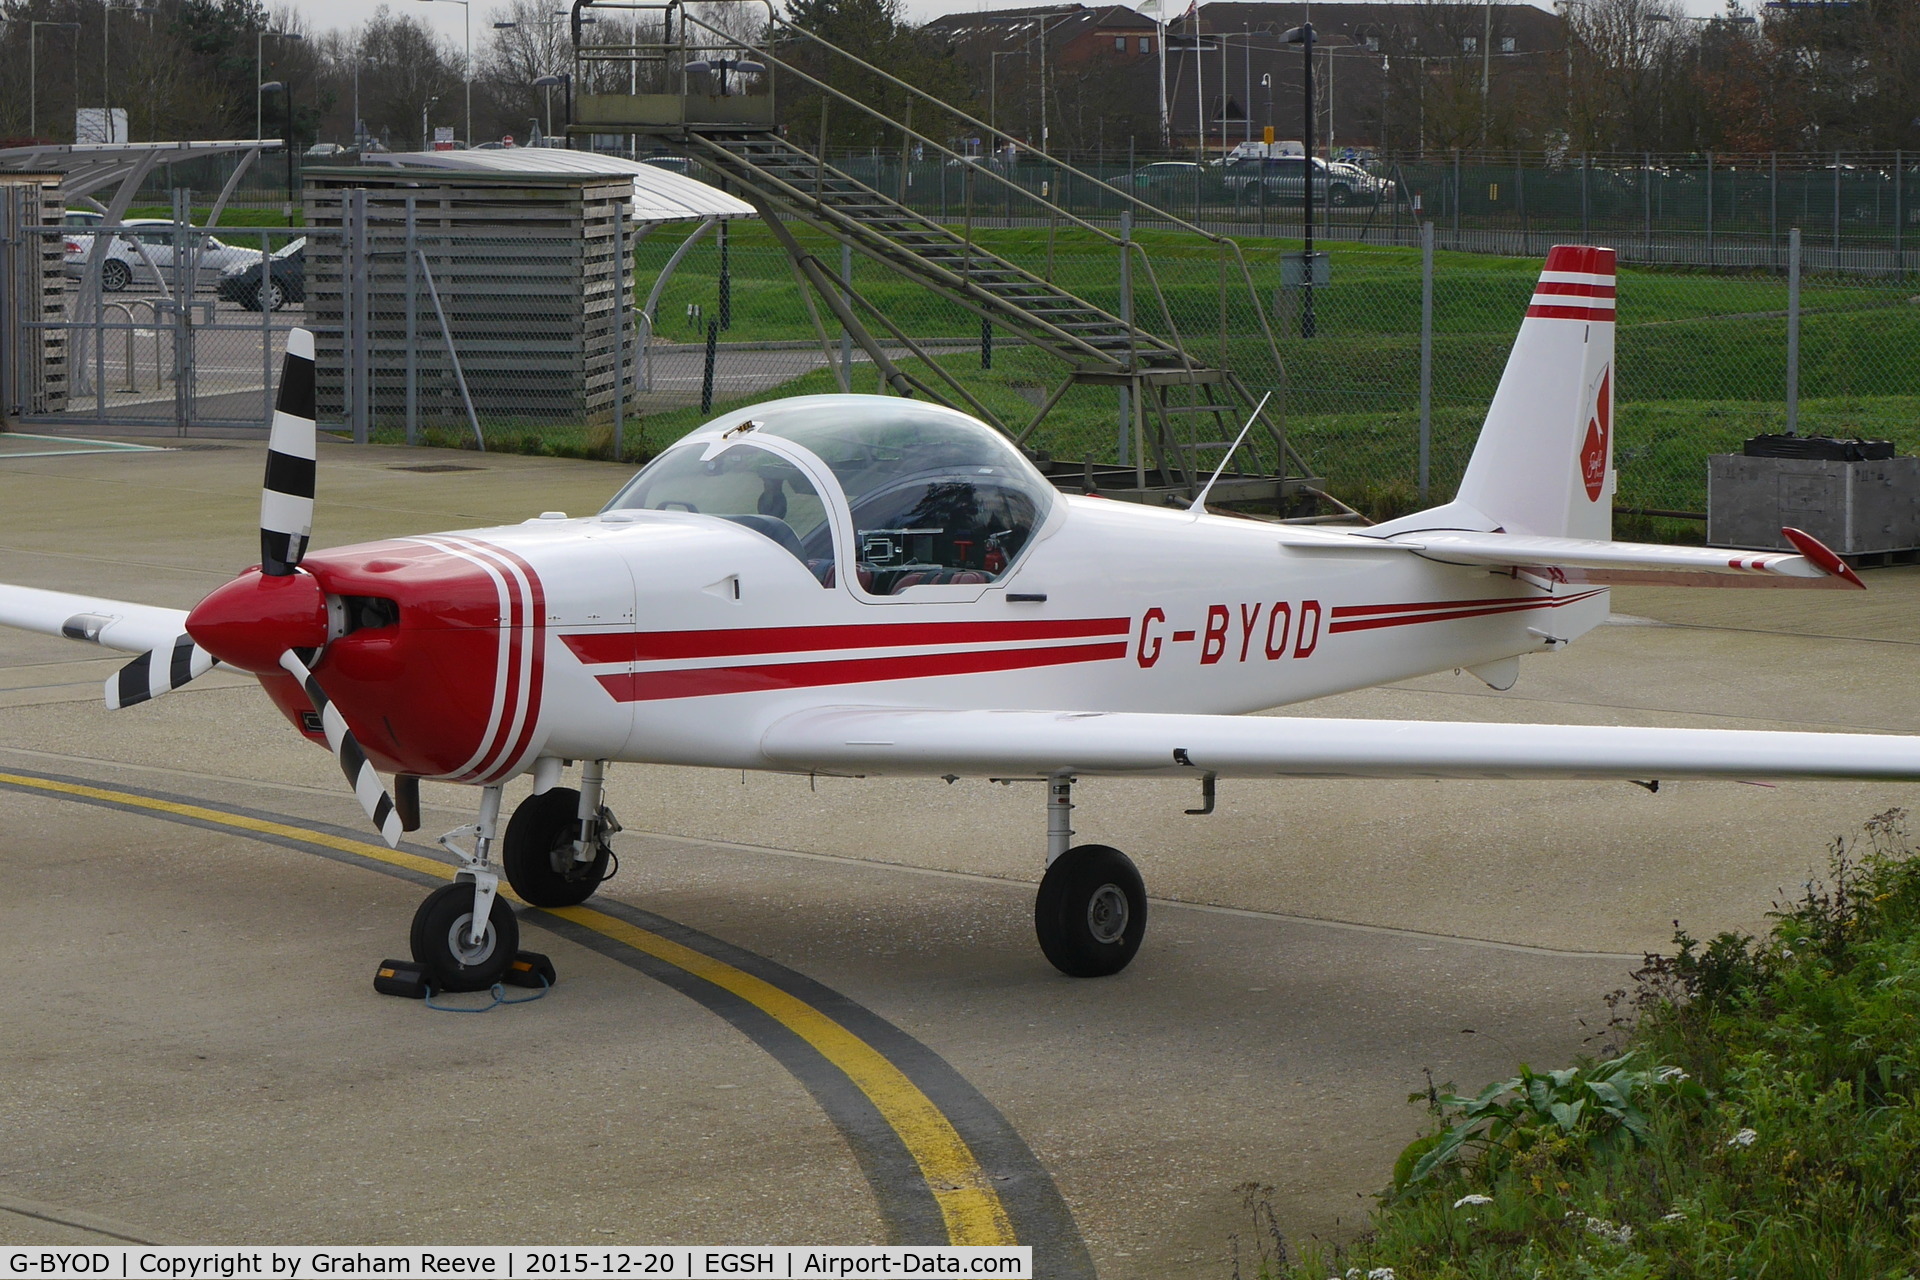 G-BYOD, 2001 Slingsby T-67M-200 Firefly C/N 2265, Parked at Norwich.